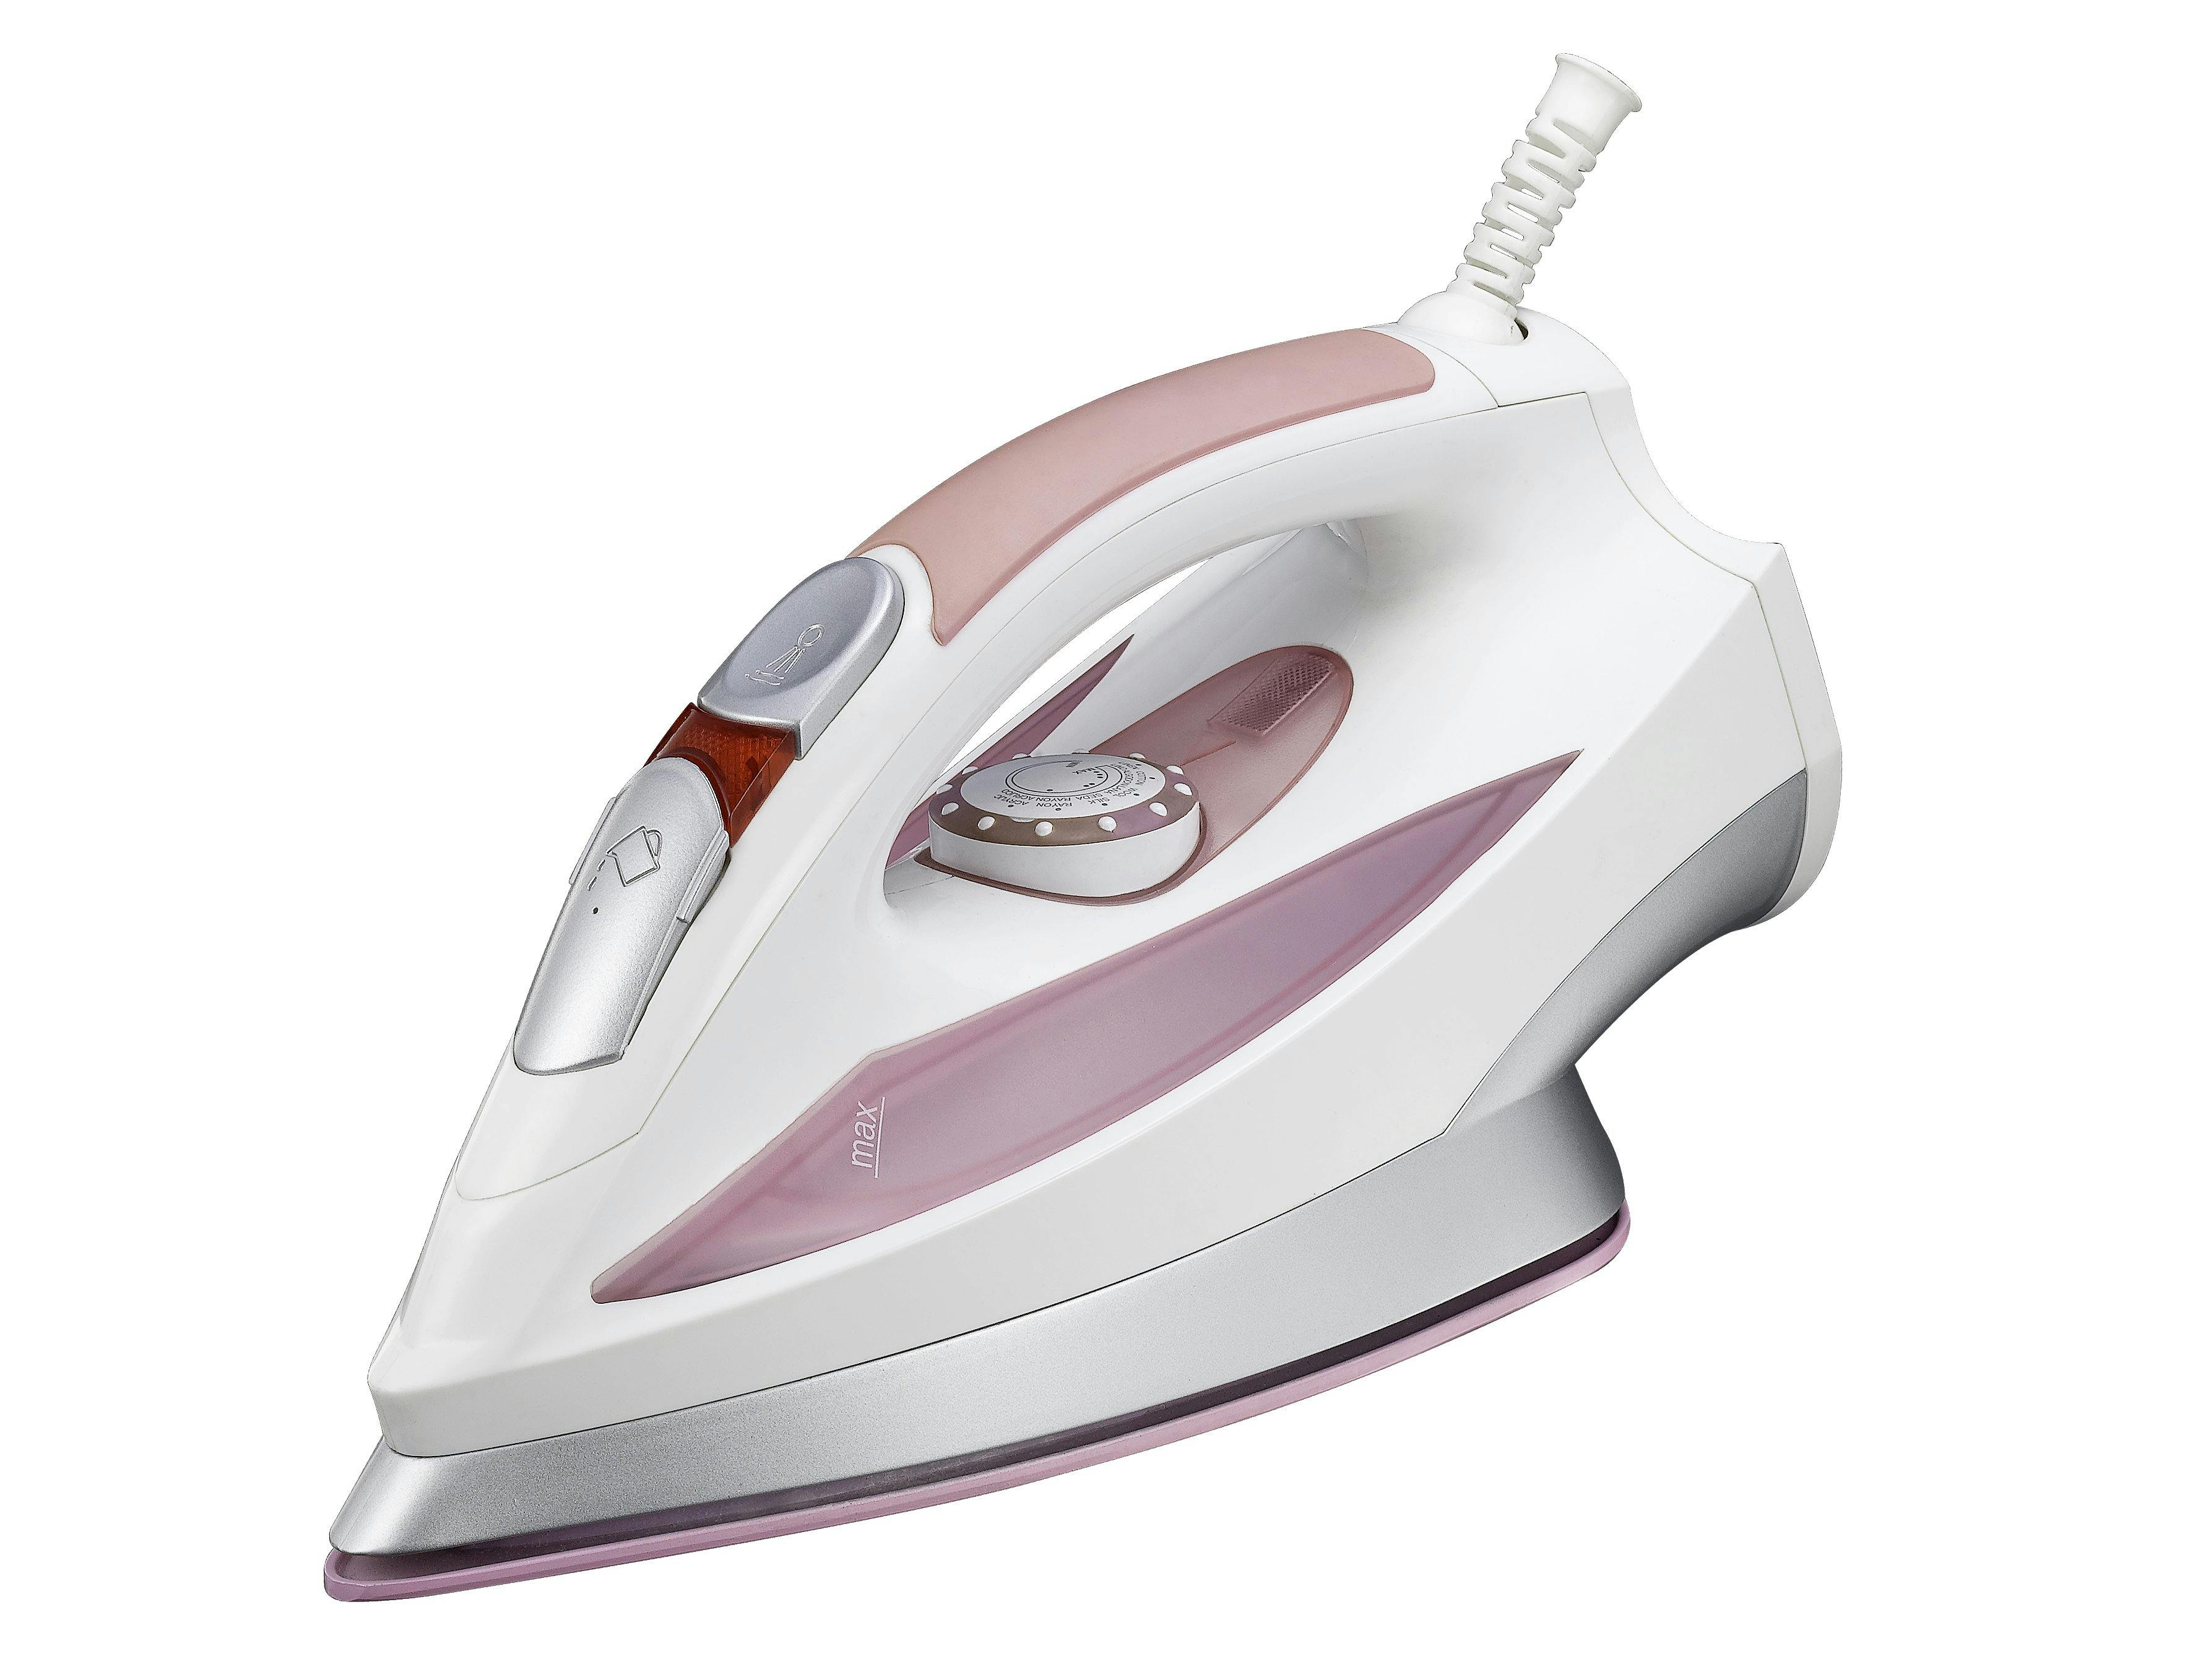 Grey and Pink Cordless Clothes Iron · Free Stock Photo